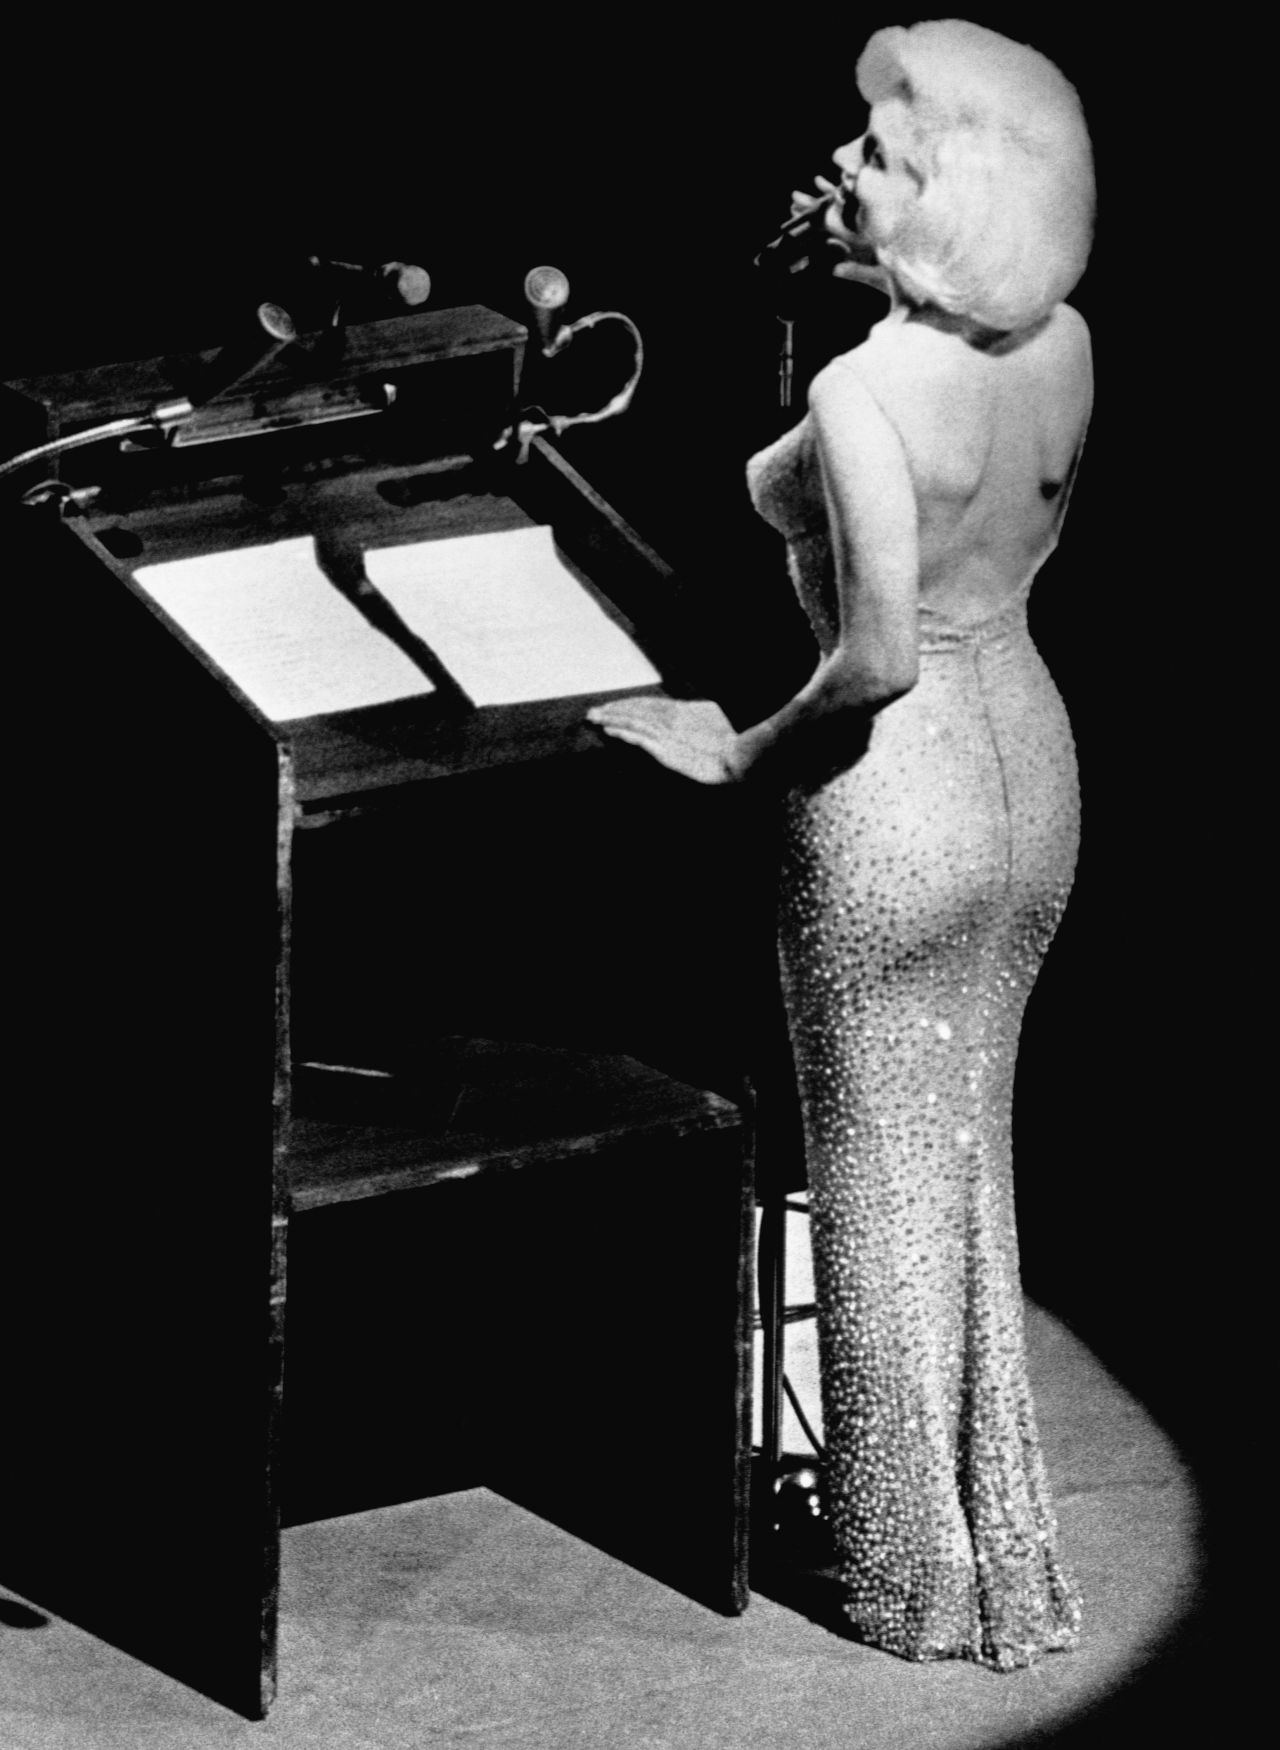 Marilyn Monroe sings "Happy Birthday" to President John F. Kennedy at Madison Square Garden, for his upcoming 45th birthday.